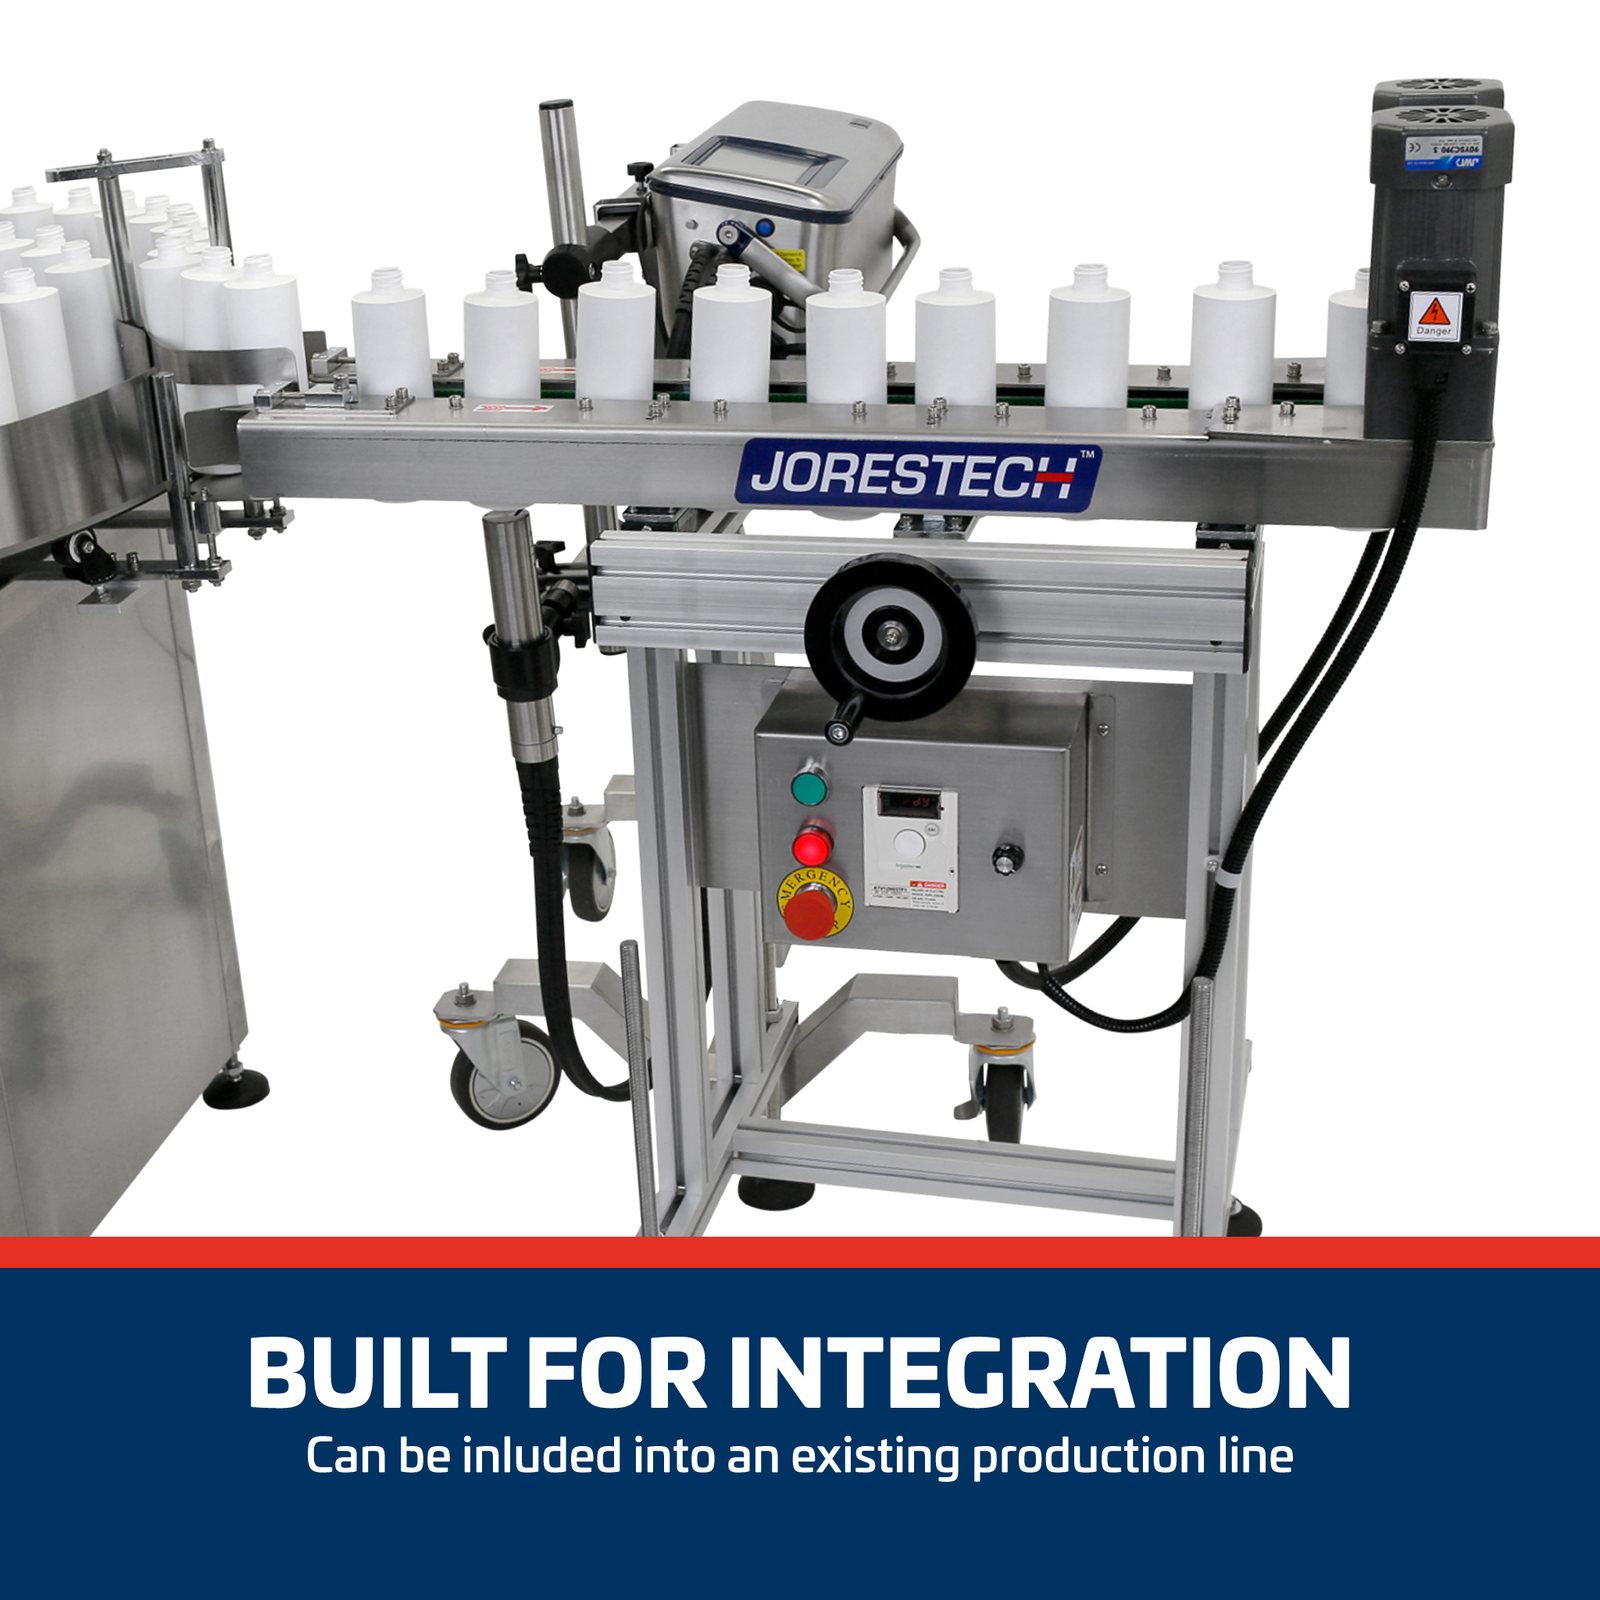 The Stainless steel JORES TECHNOLOGIES® bottomless conveyor with side belts integrated with an inkjet printer and a rotary table while printing a large number of white plastic containers. Banner bellow reads: Built for integration can be included into an existing production line